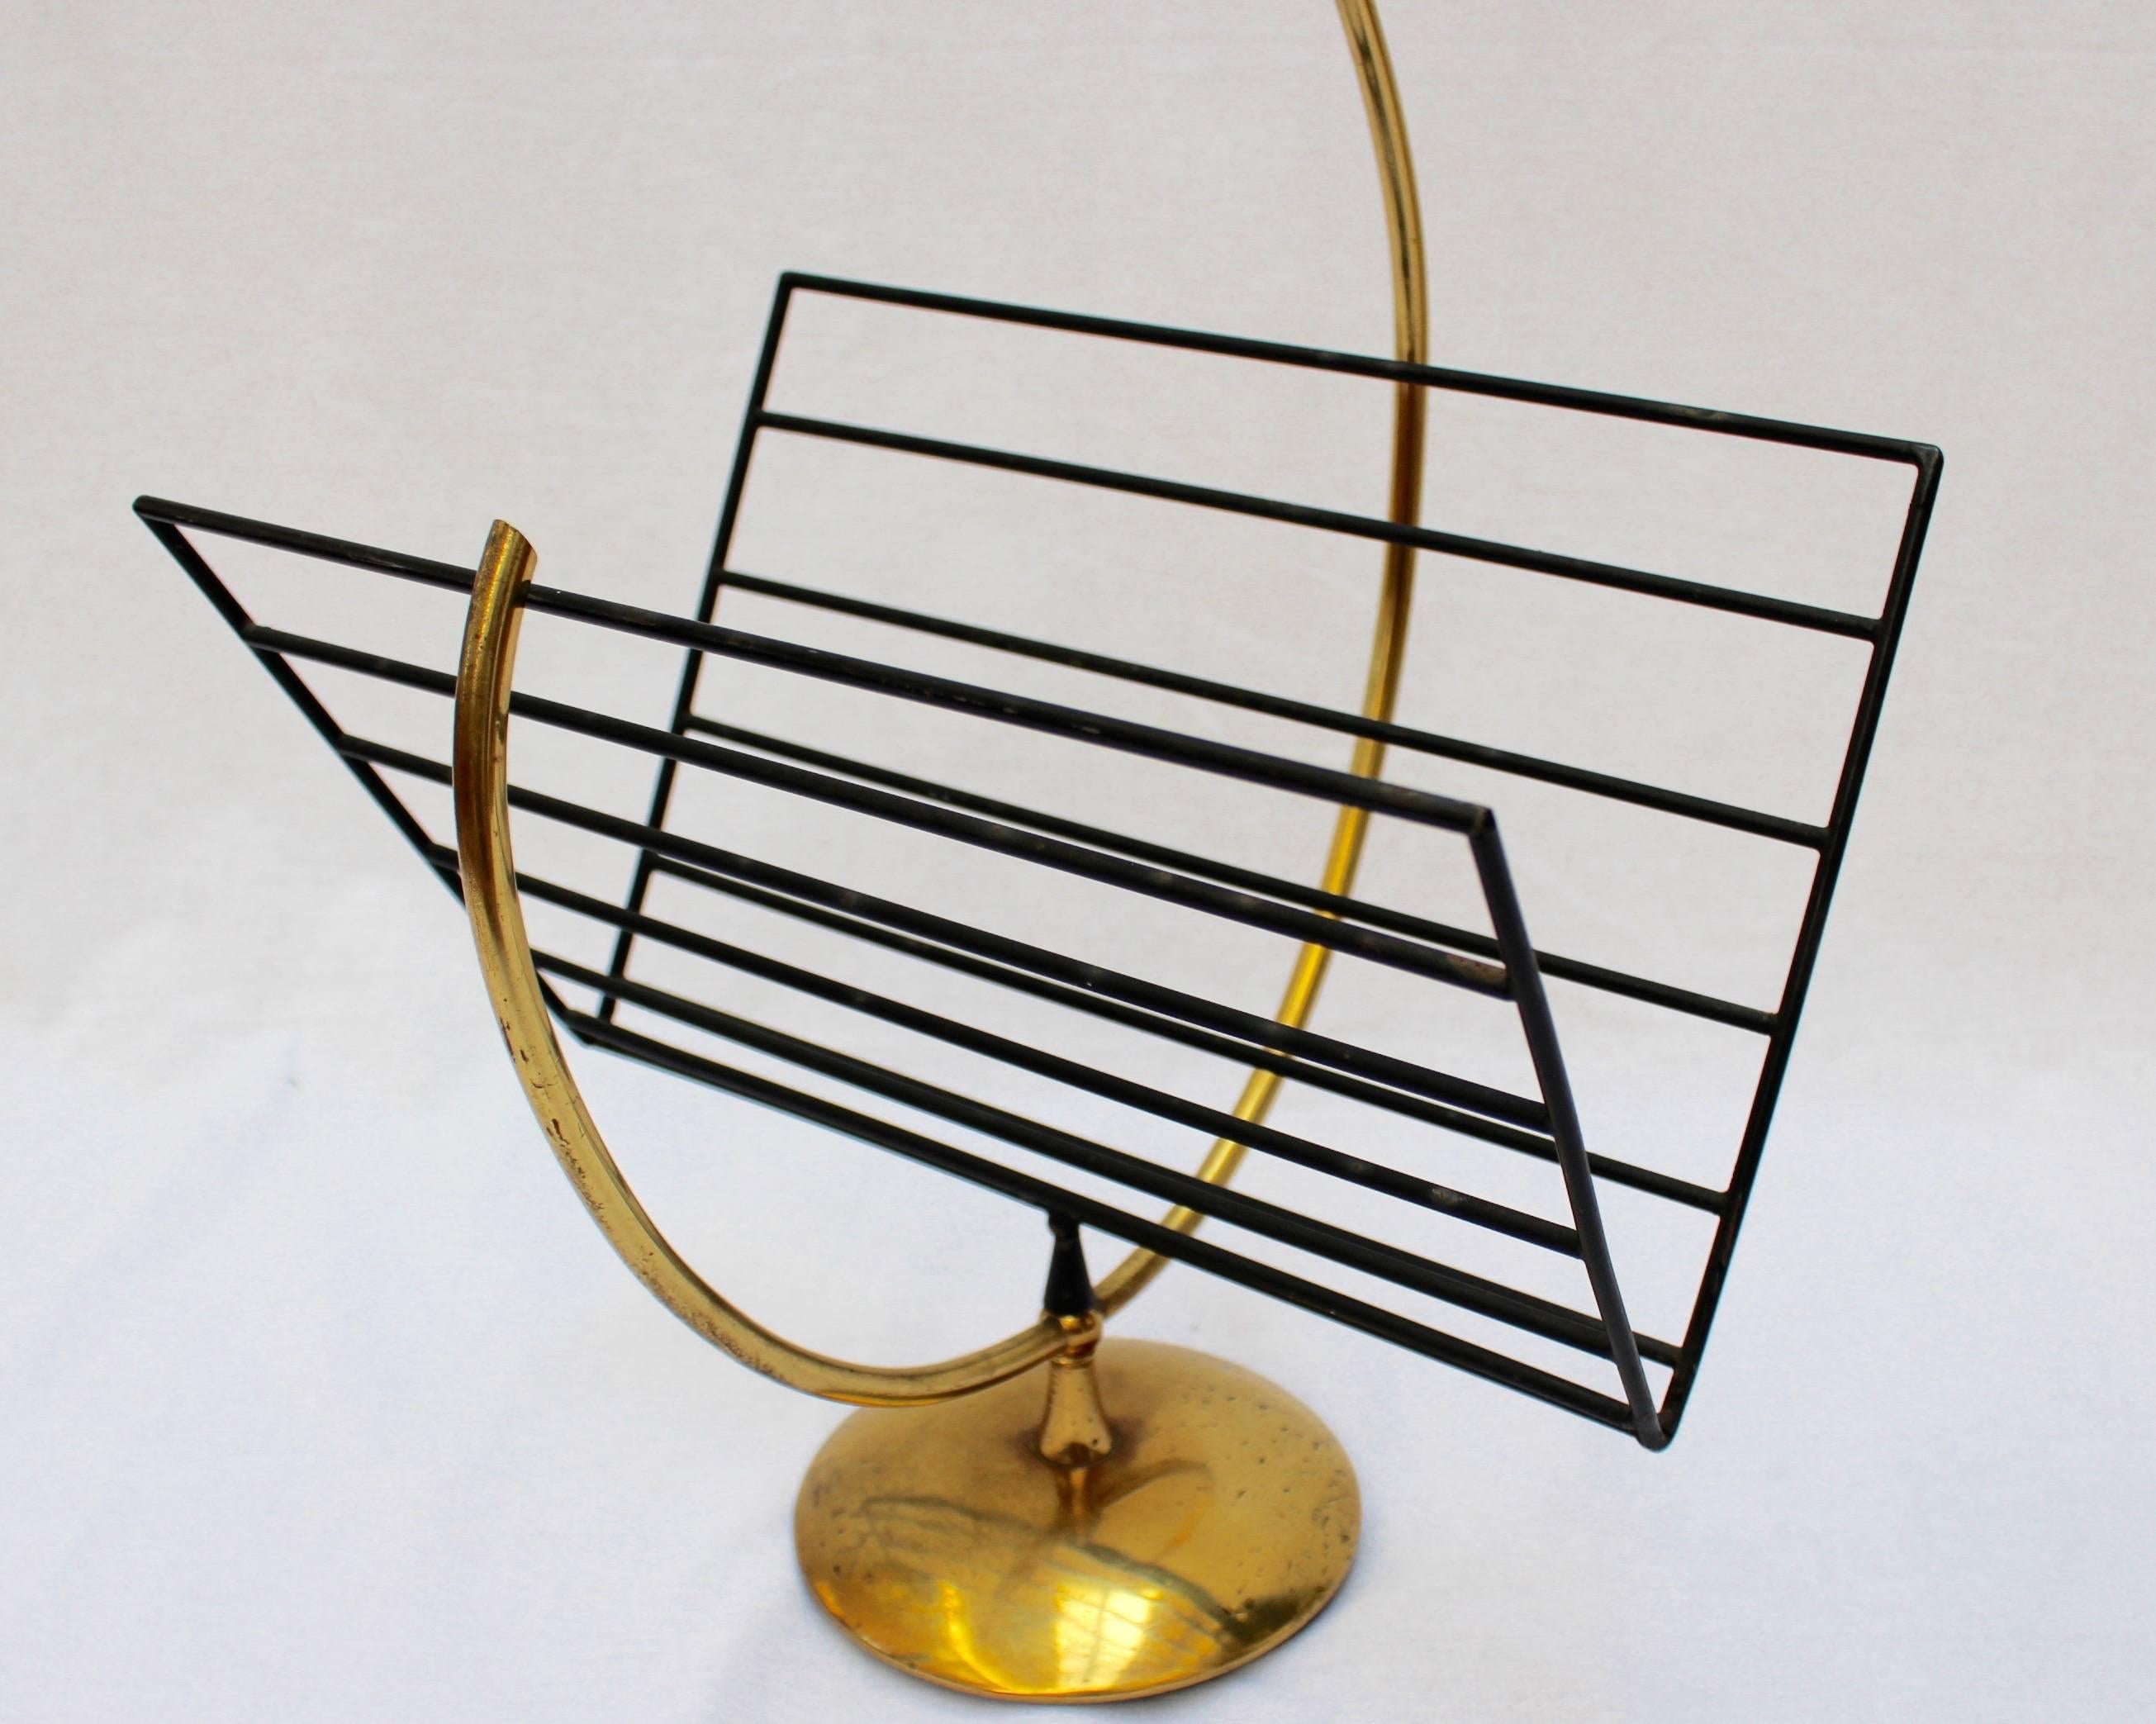 Music Note-Shaped Italian Brass Magazine Stand (c. 1950s) For Sale 1